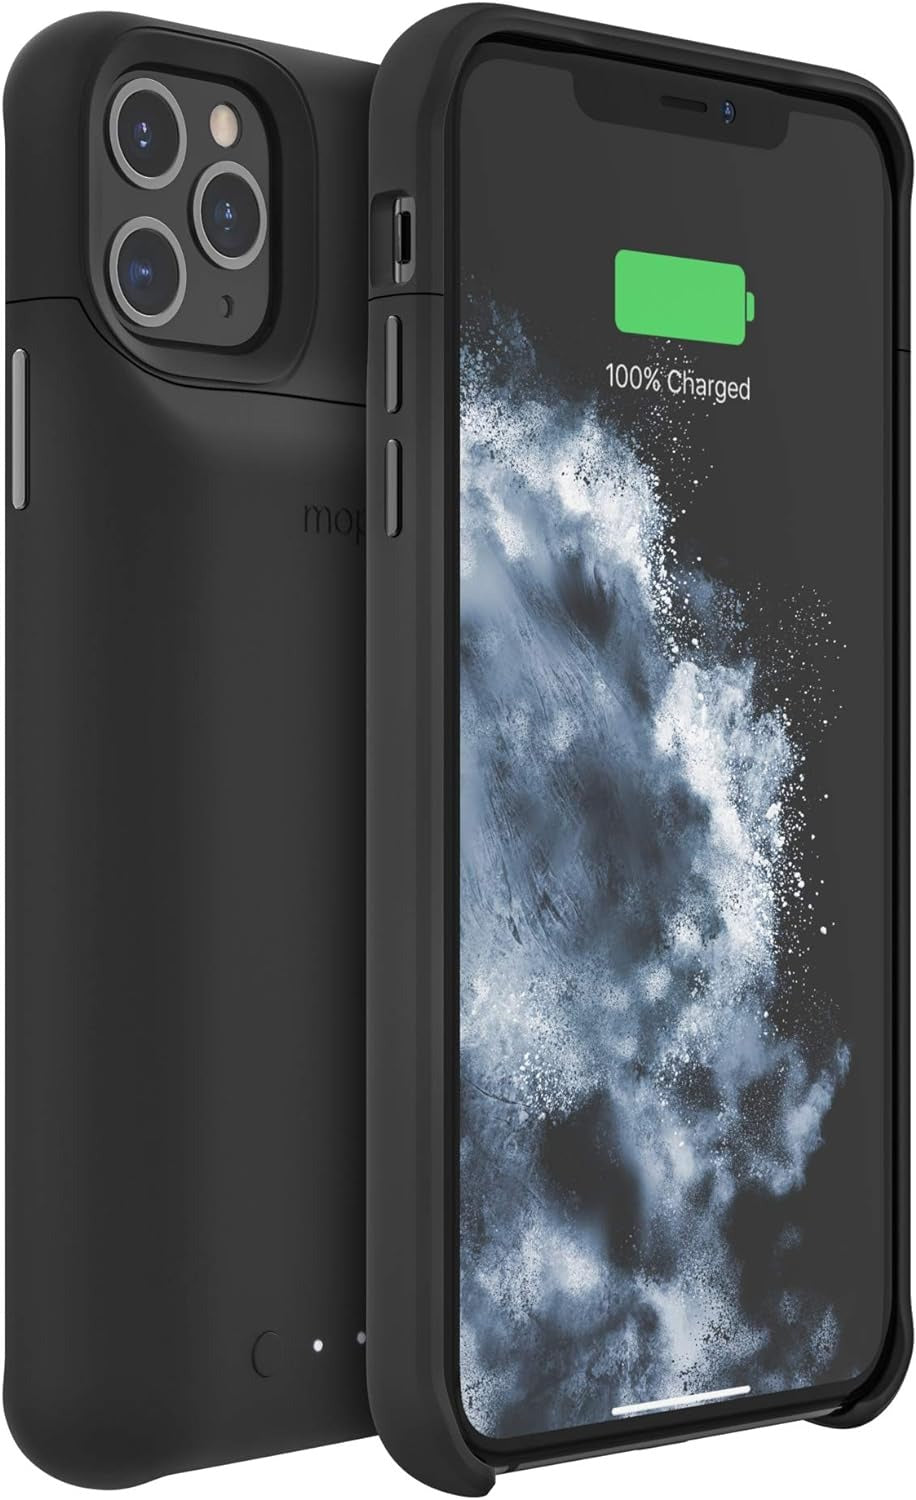 Mophie Juice Pack Access 2200Mah Battery Case for iPhone 11 Pro Max - Black (Certified Refurbished)